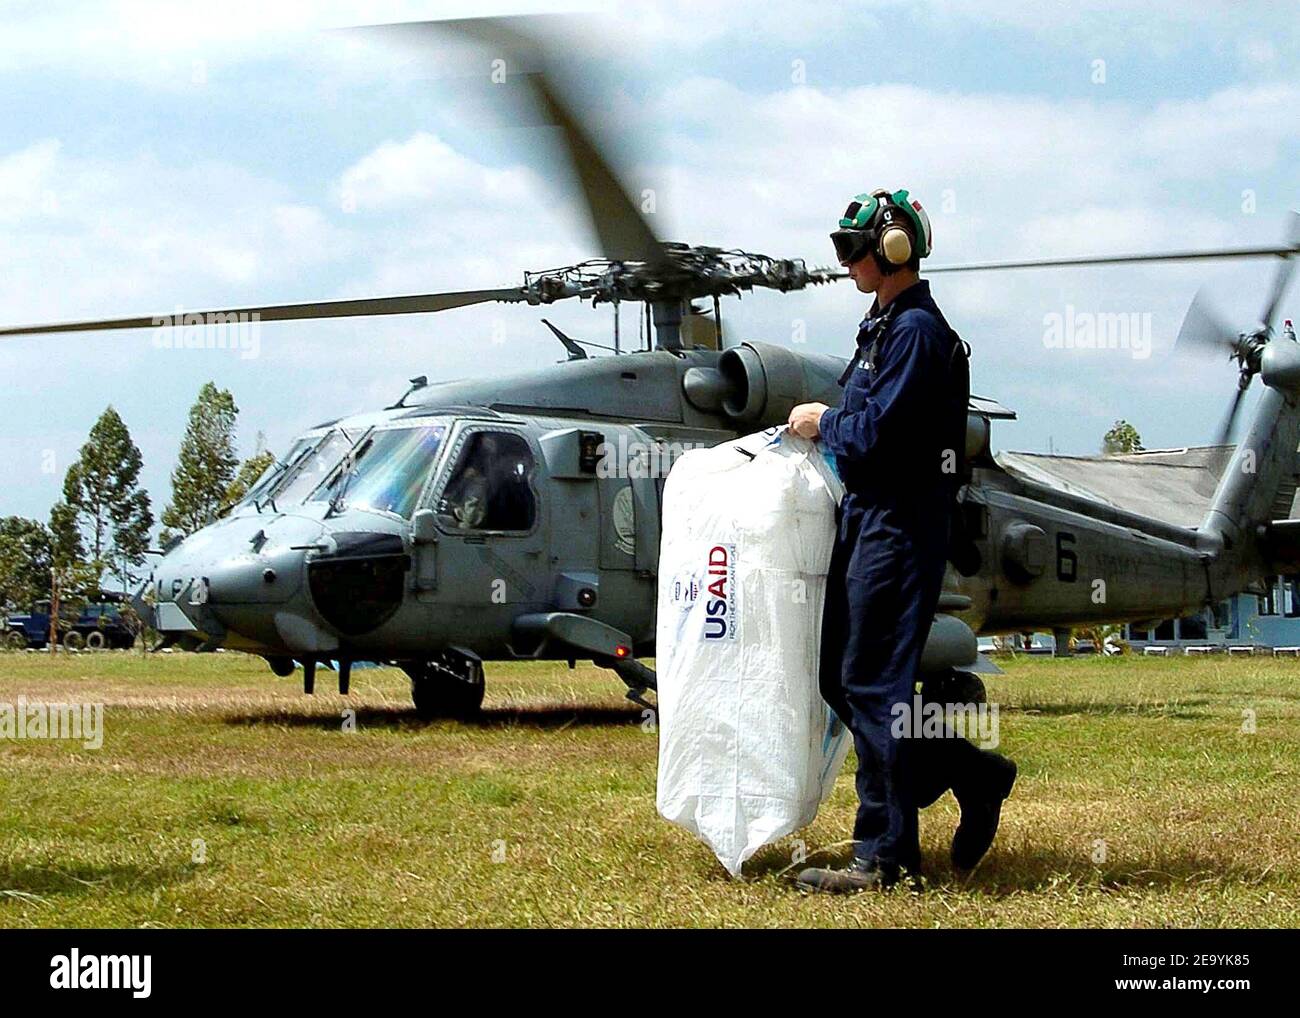 A Sailor carries a bag of empty water jugs to a waiting HH-60H Seahawk helicopter, assigned to the 'Golden Falcons' of Helicopter Anti-Submarine Squadron Two (HS-2), en route to USS Abraham Lincoln (CVN 72) to be filled with purified water. Helicopters assigned to Carrier Air Wing Two (CVW-2) and Sailors from Abraham Lincoln are supporting Operation Unified Assistance, the humanitarian operation effort in the wake of the Tsunami that struck South East Asia. Photo by Seth C. Peterson/USN via ABACA. Stock Photo